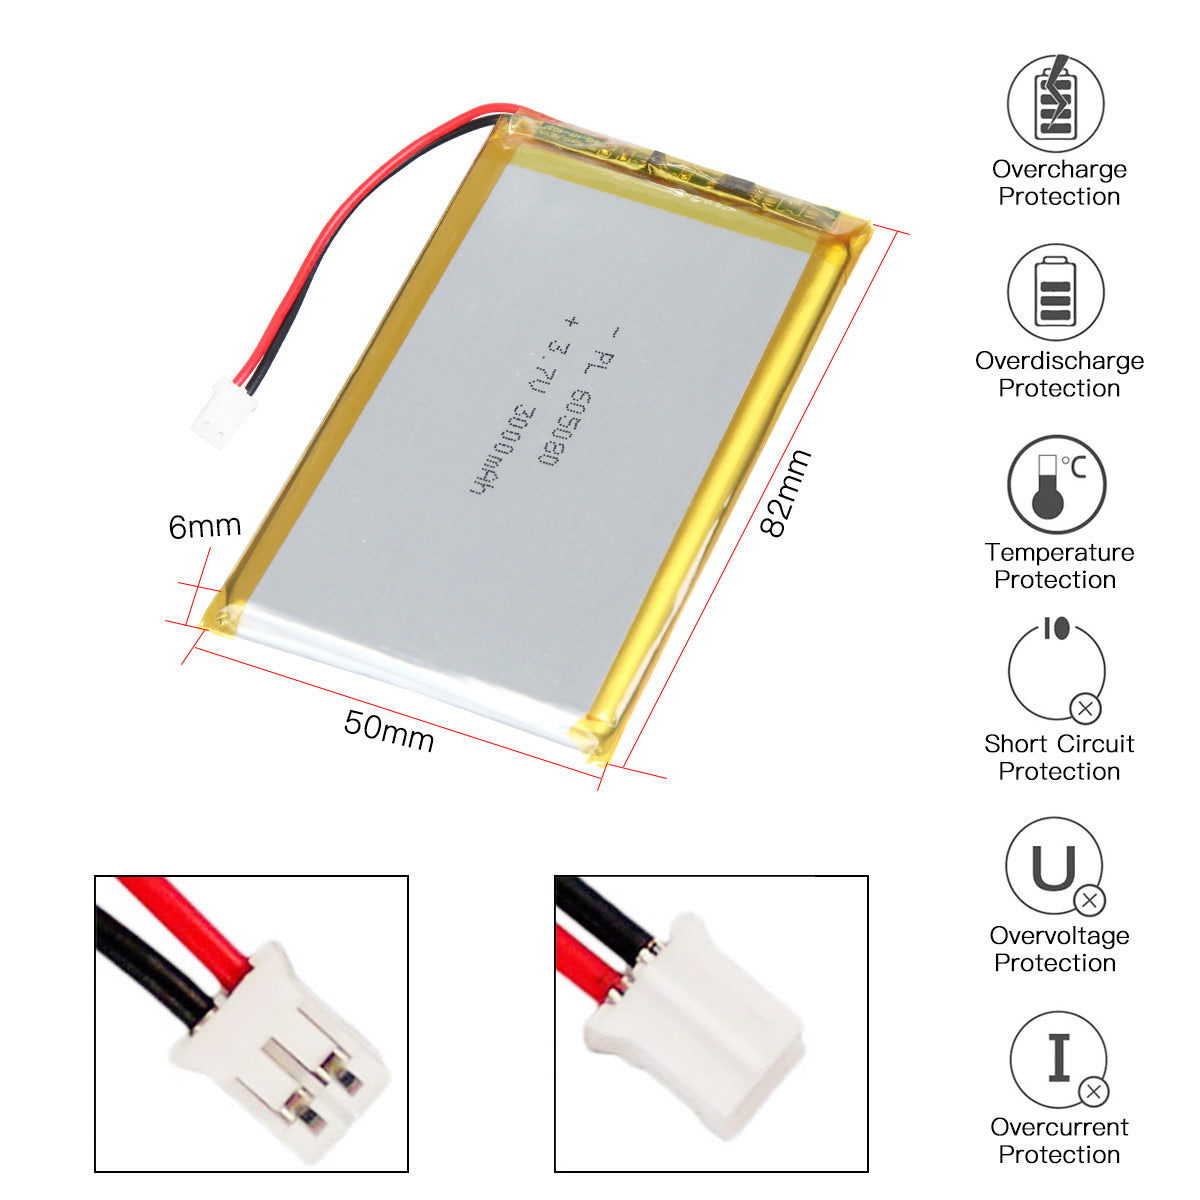 YDL 3.7V 3000mAh 605080 Rechargeable Lithium Polymer Battery Length 82mm